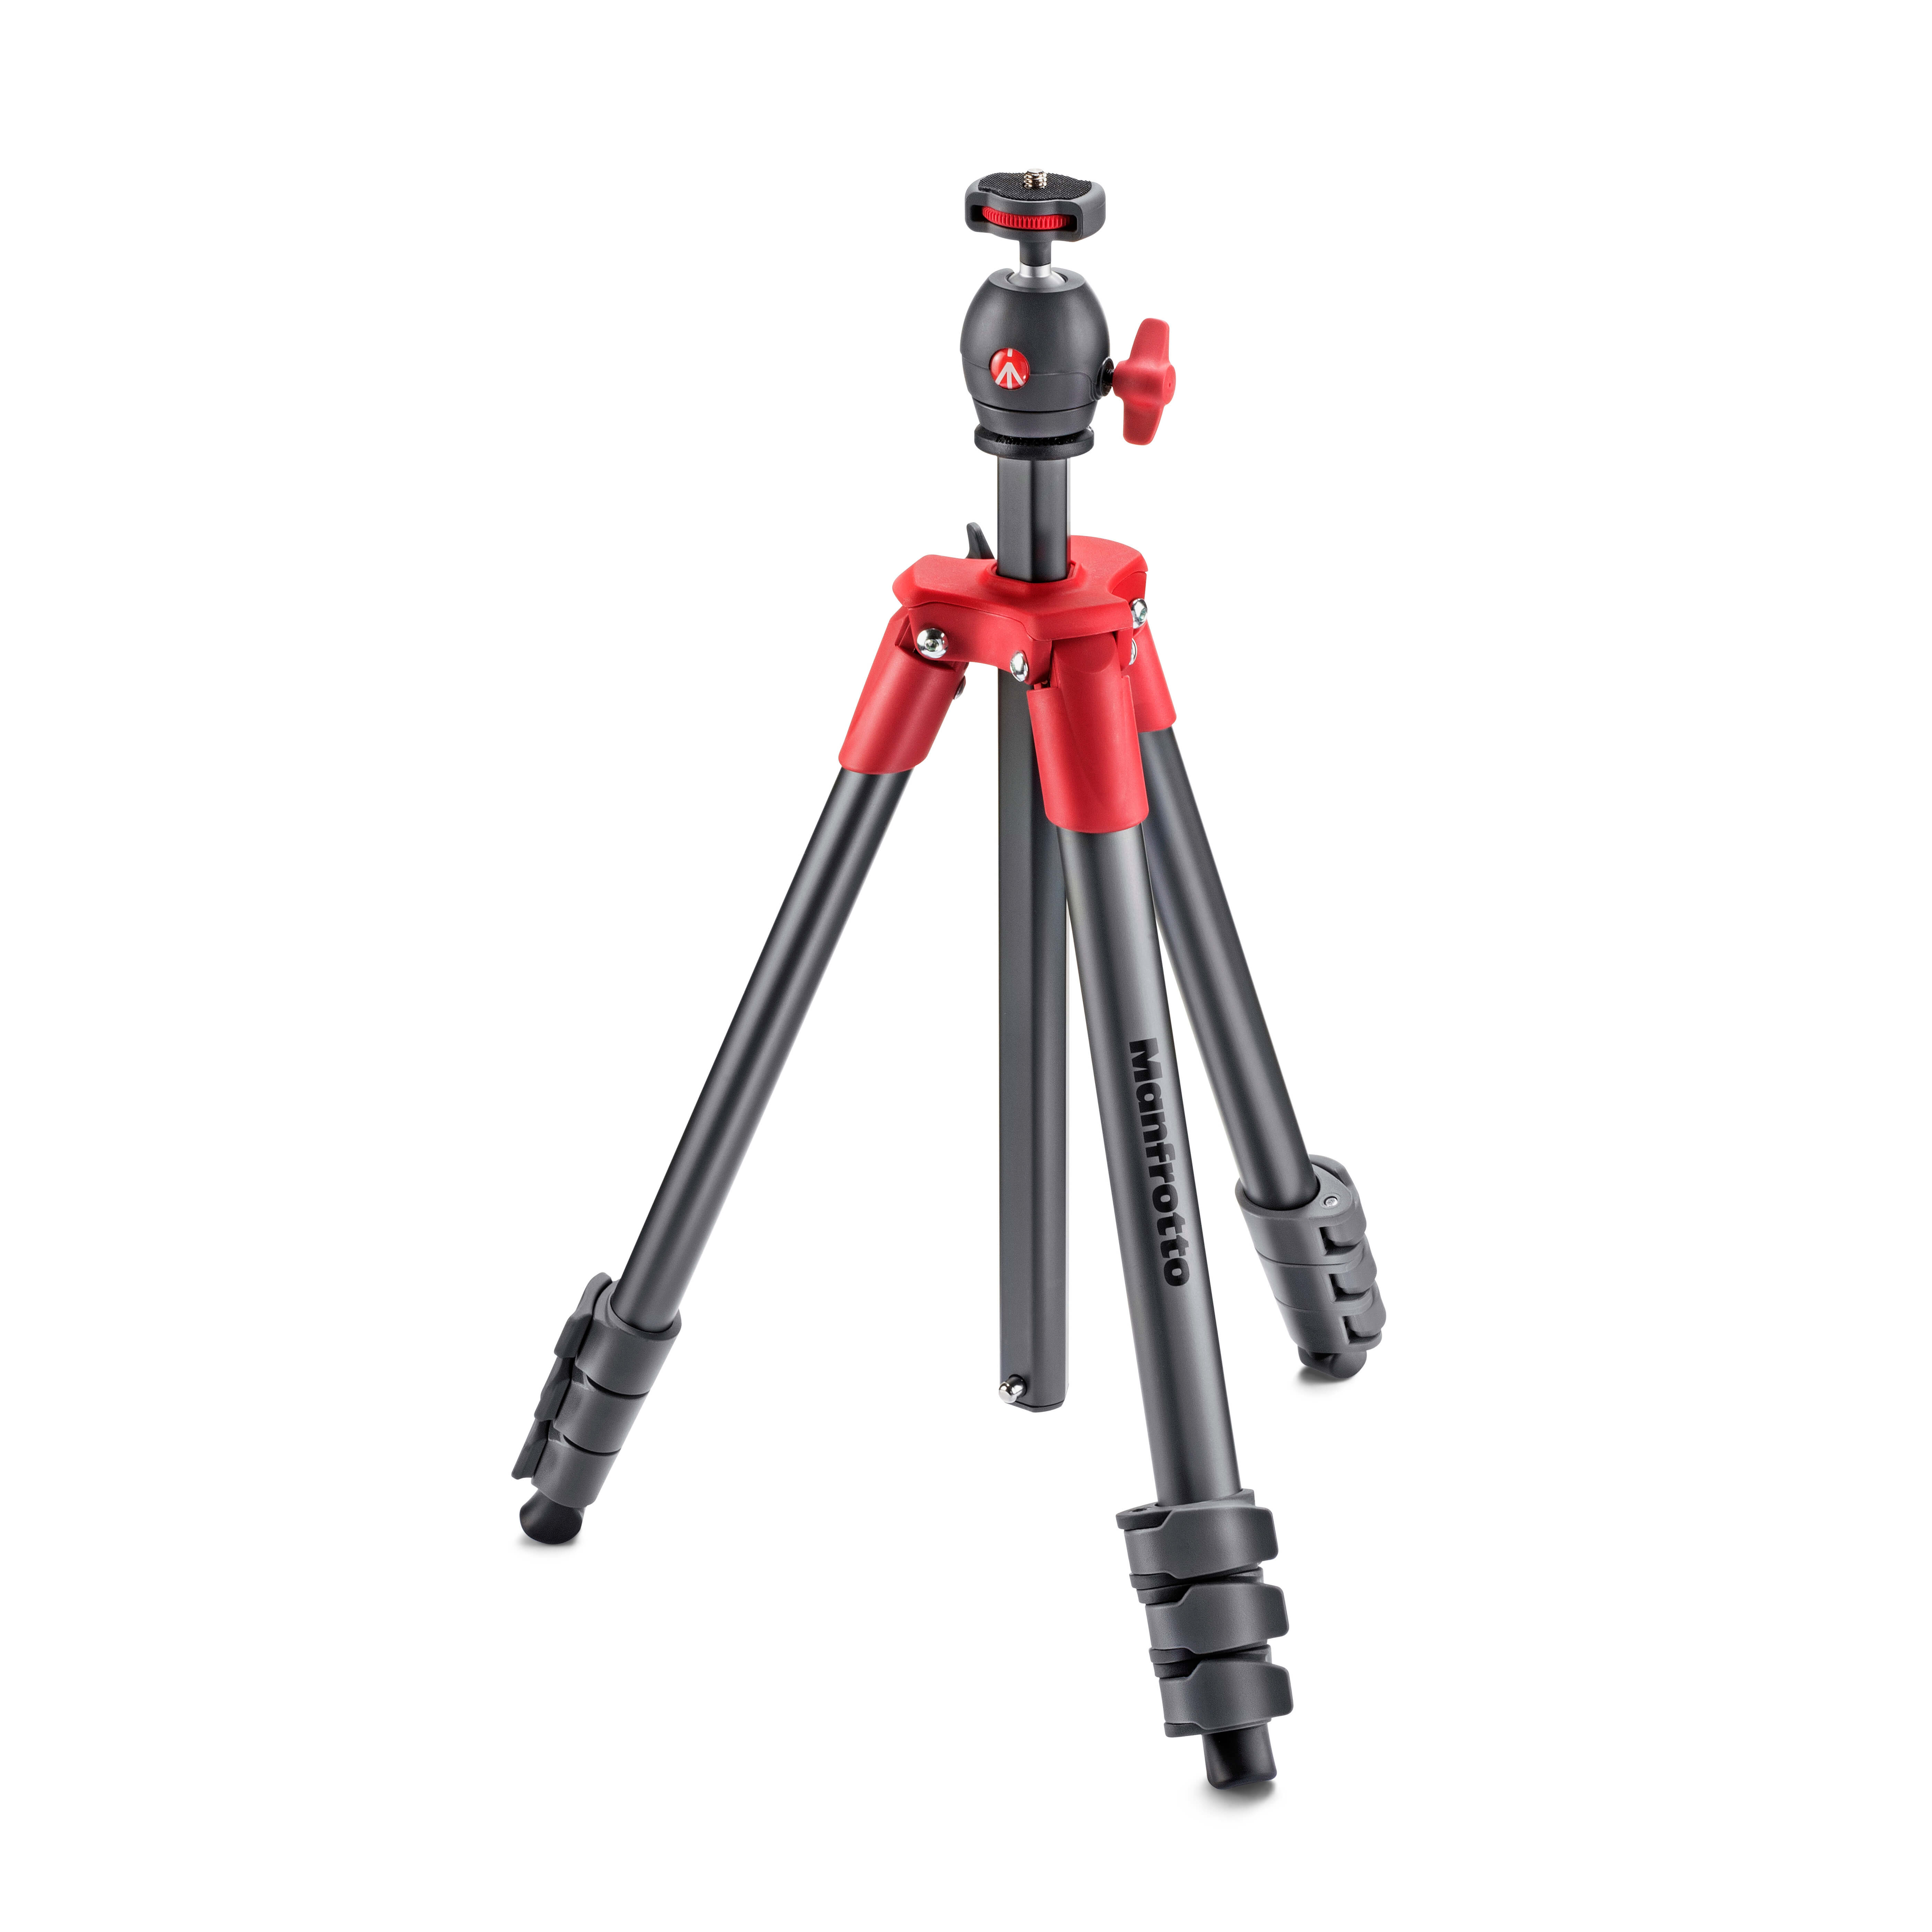 Tripod kit Compact MKCOMPACTL T, Red